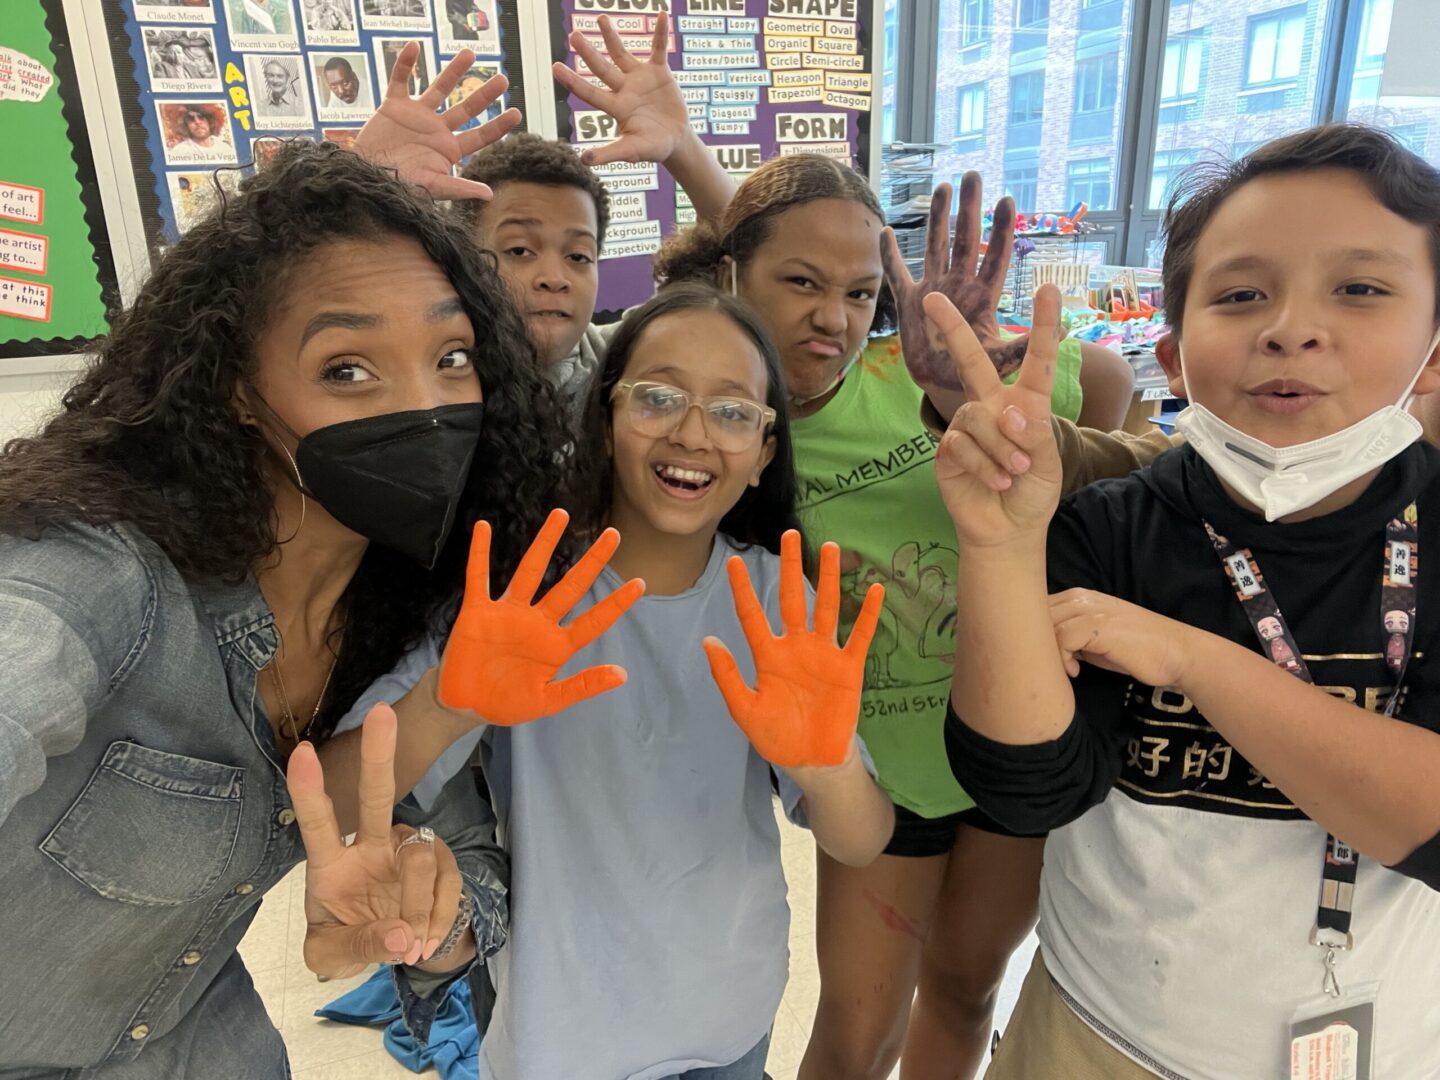 A group of children posing for a photo with their hands painted orange.